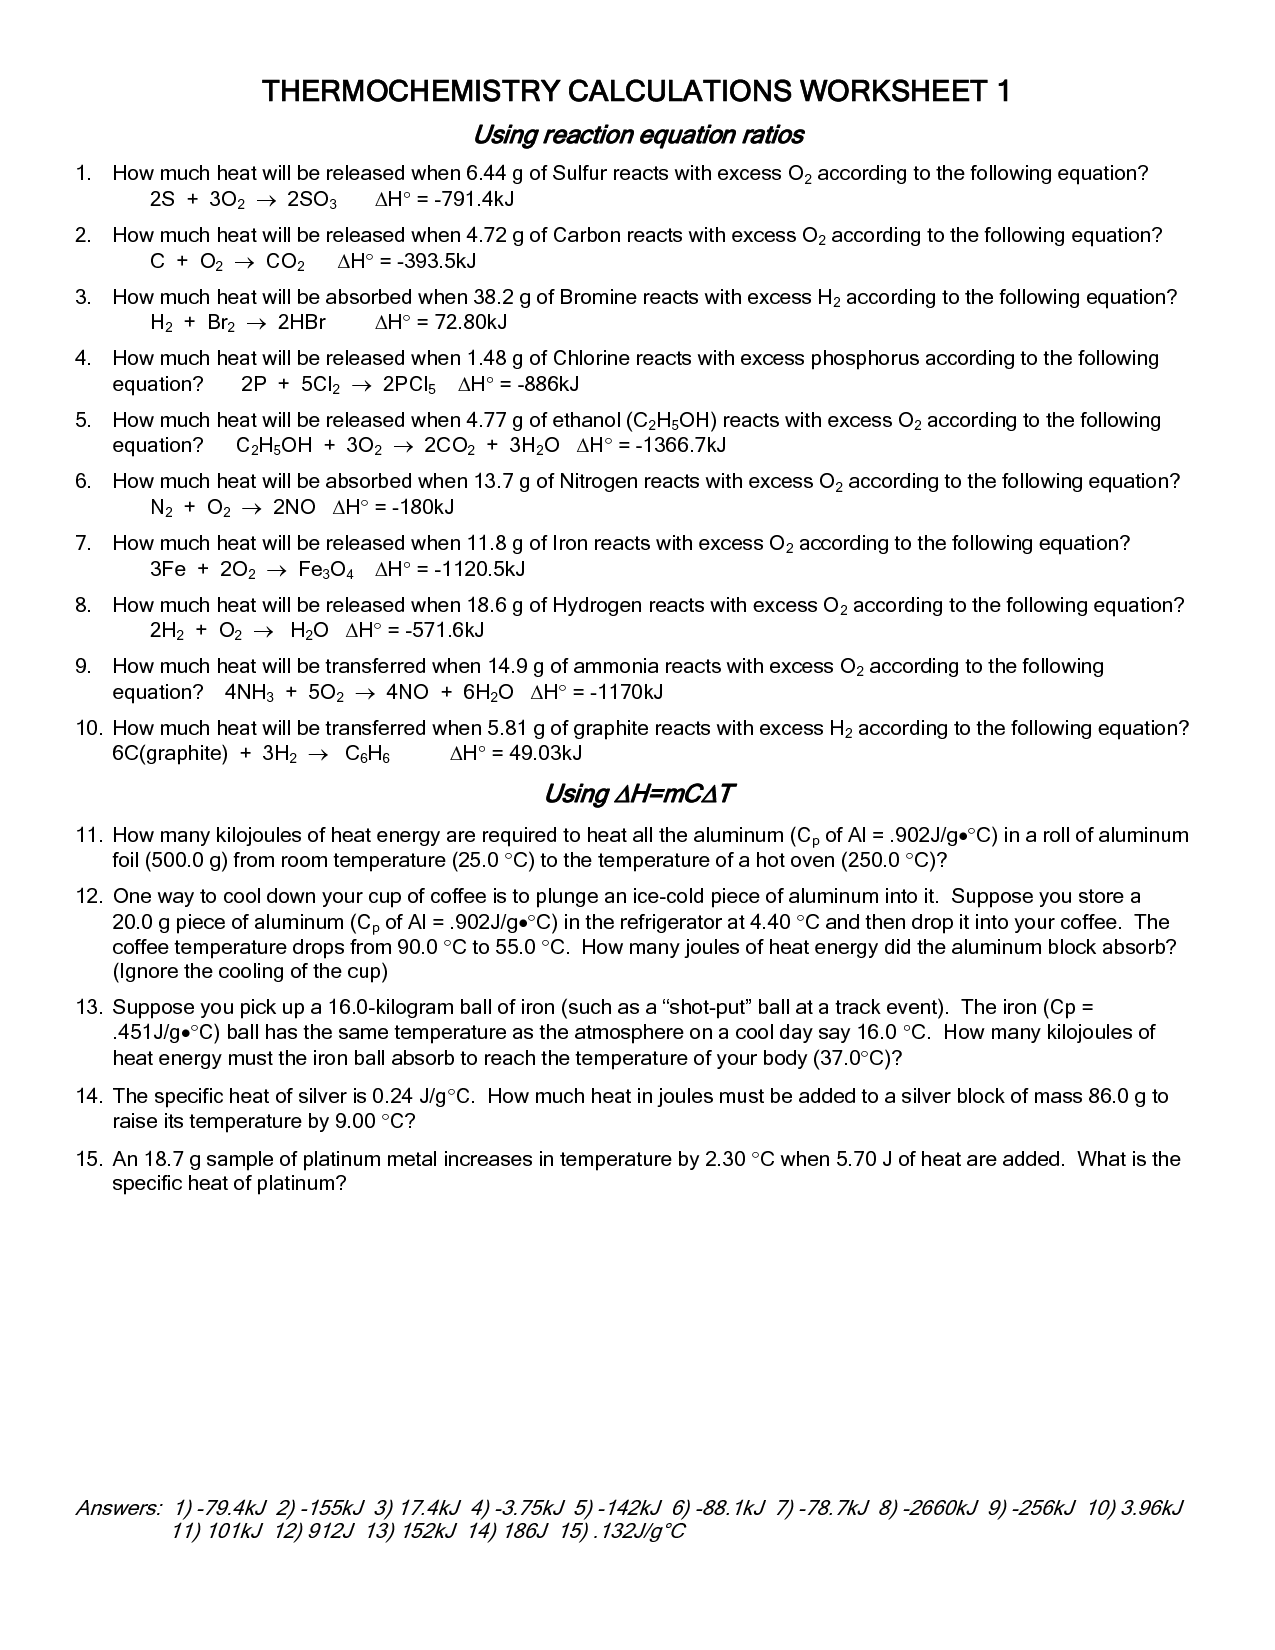 12-best-images-of-heat-worksheet-1-specific-heat-calculations